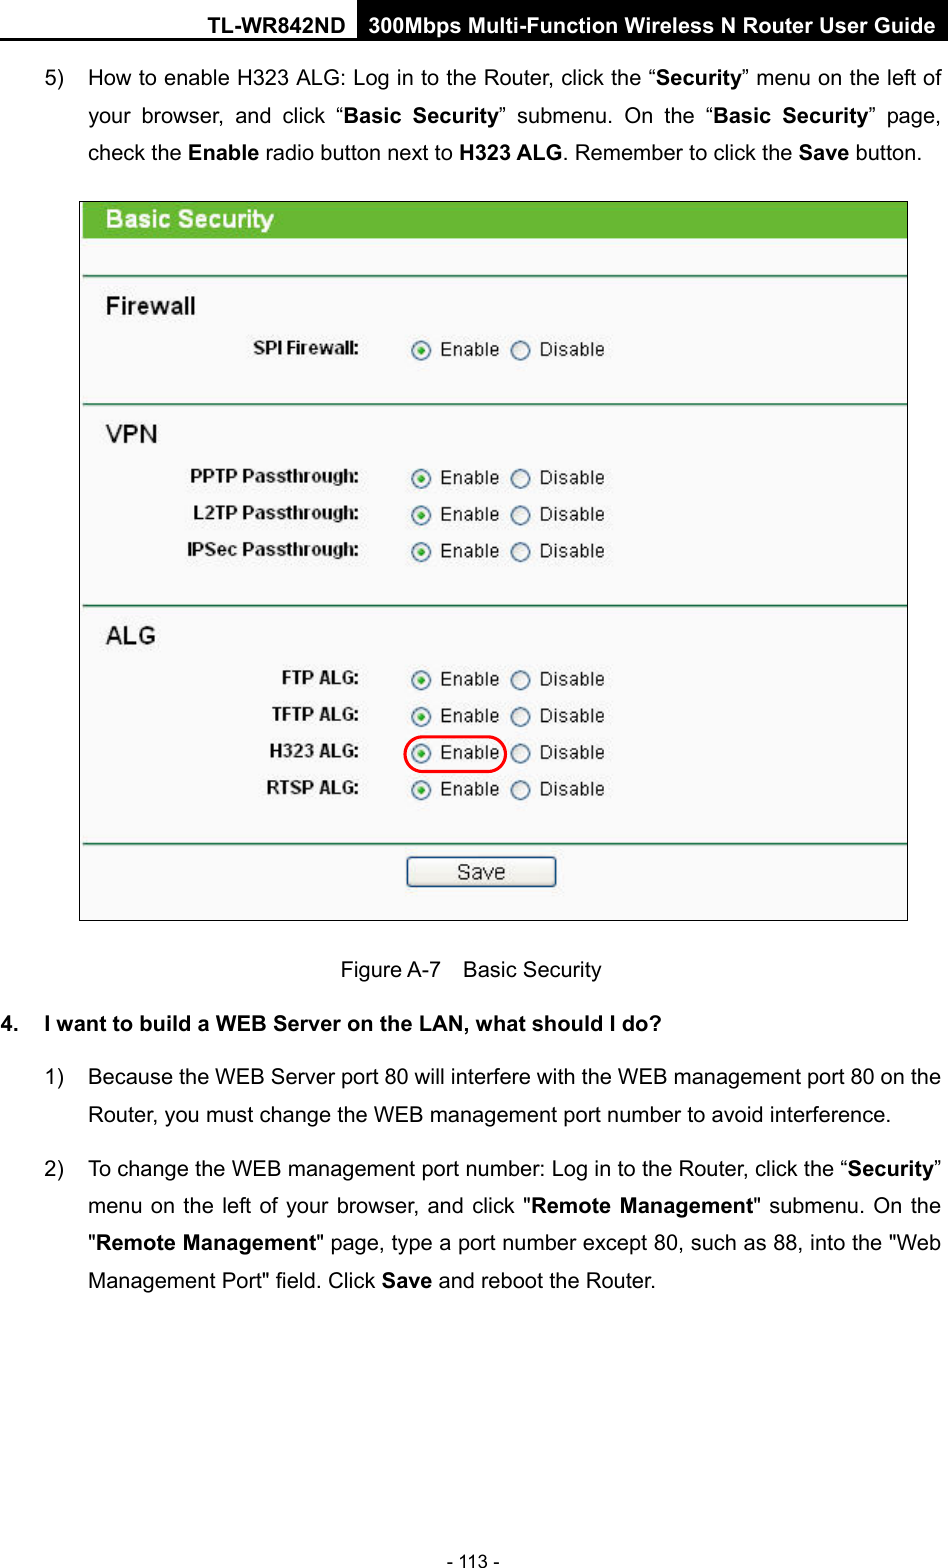 TL-WR842ND 300Mbps Multi-Function Wireless N Router User Guide  - 113 - 5) How to enable H323 ALG: Log in to the Router, click the “Security” menu on the left of your browser, and click “Basic Security”  submenu.  On the “Basic Security”  page, check the Enable radio button next to H323 ALG. Remember to click the Save button.  Figure A-7  Basic Security 4. I want to build a WEB Server on the LAN, what should I do? 1) Because the WEB Server port 80 will interfere with the WEB management port 80 on the Router, you must change the WEB management port number to avoid interference. 2) To change the WEB management port number: Log in to the Router, click the “Security” menu on the left of your browser, and click &quot;Remote Management&quot; submenu. On the &quot;Remote Management&quot; page, type a port number except 80, such as 88, into the &quot;Web Management Port&quot; field. Click Save and reboot the Router. 